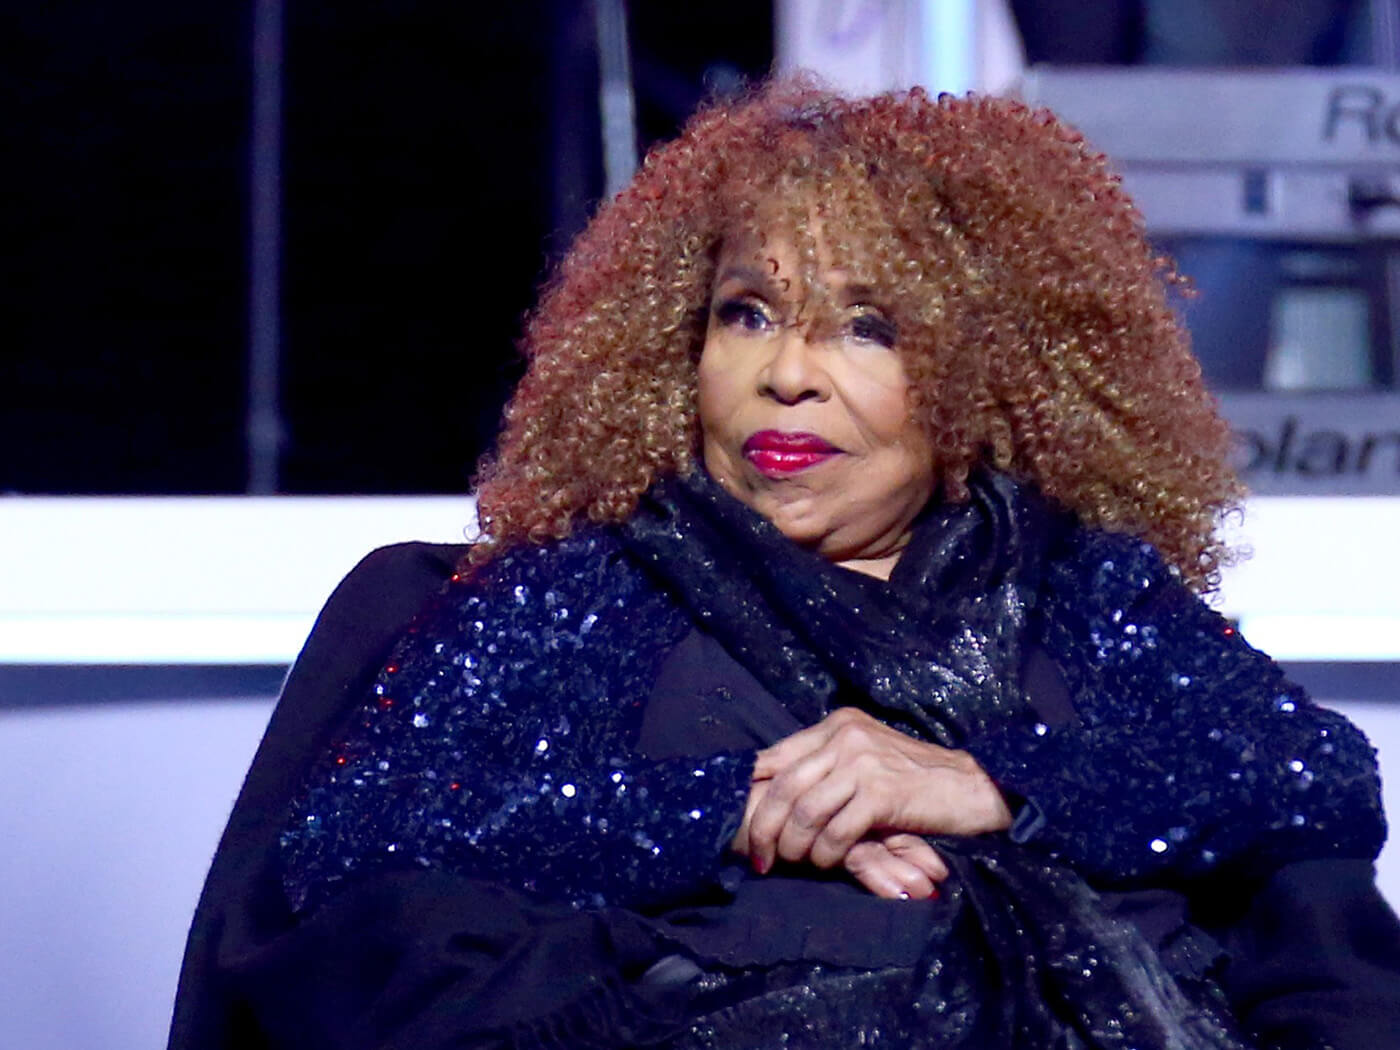 Roberta Flack’s ALS diagnosis has made it impossible for her to sing